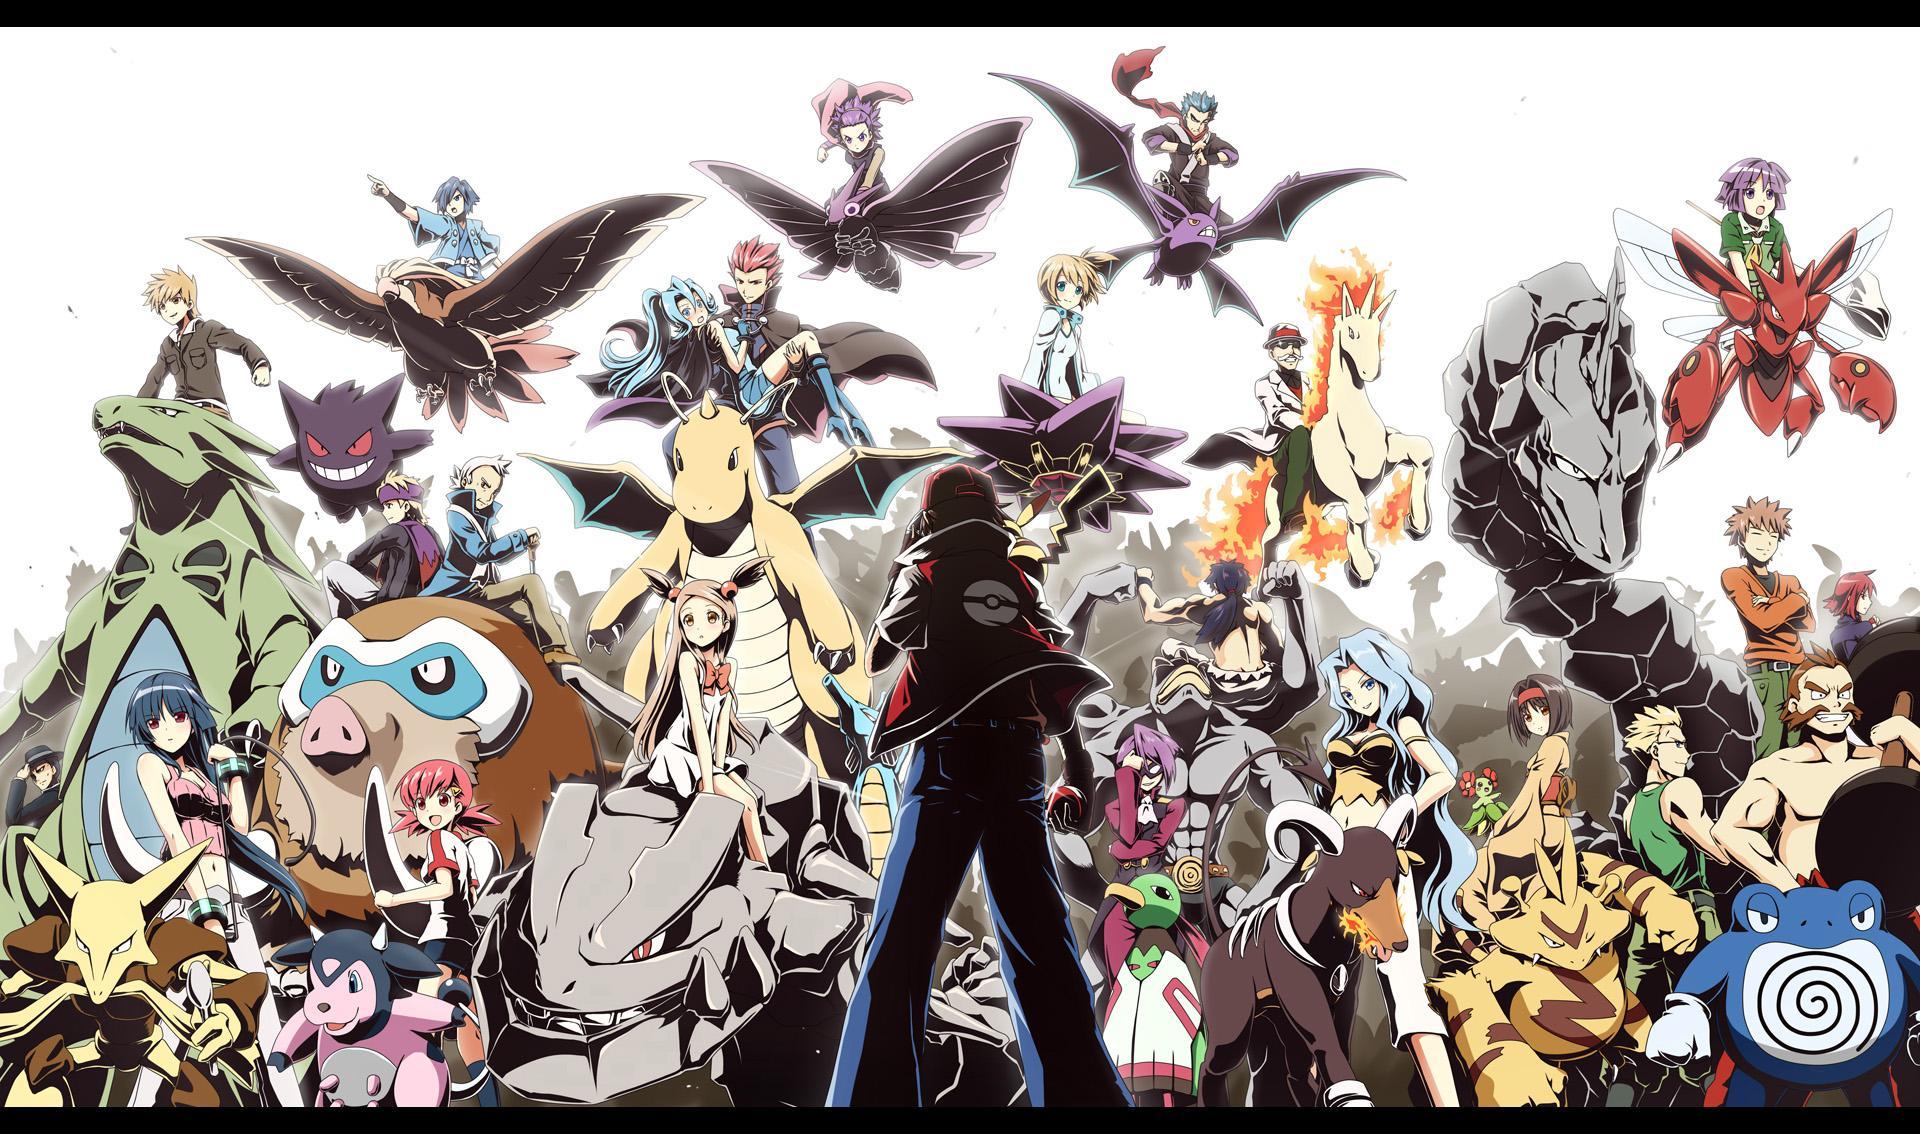 Here you go, have a pokemon wallpaper